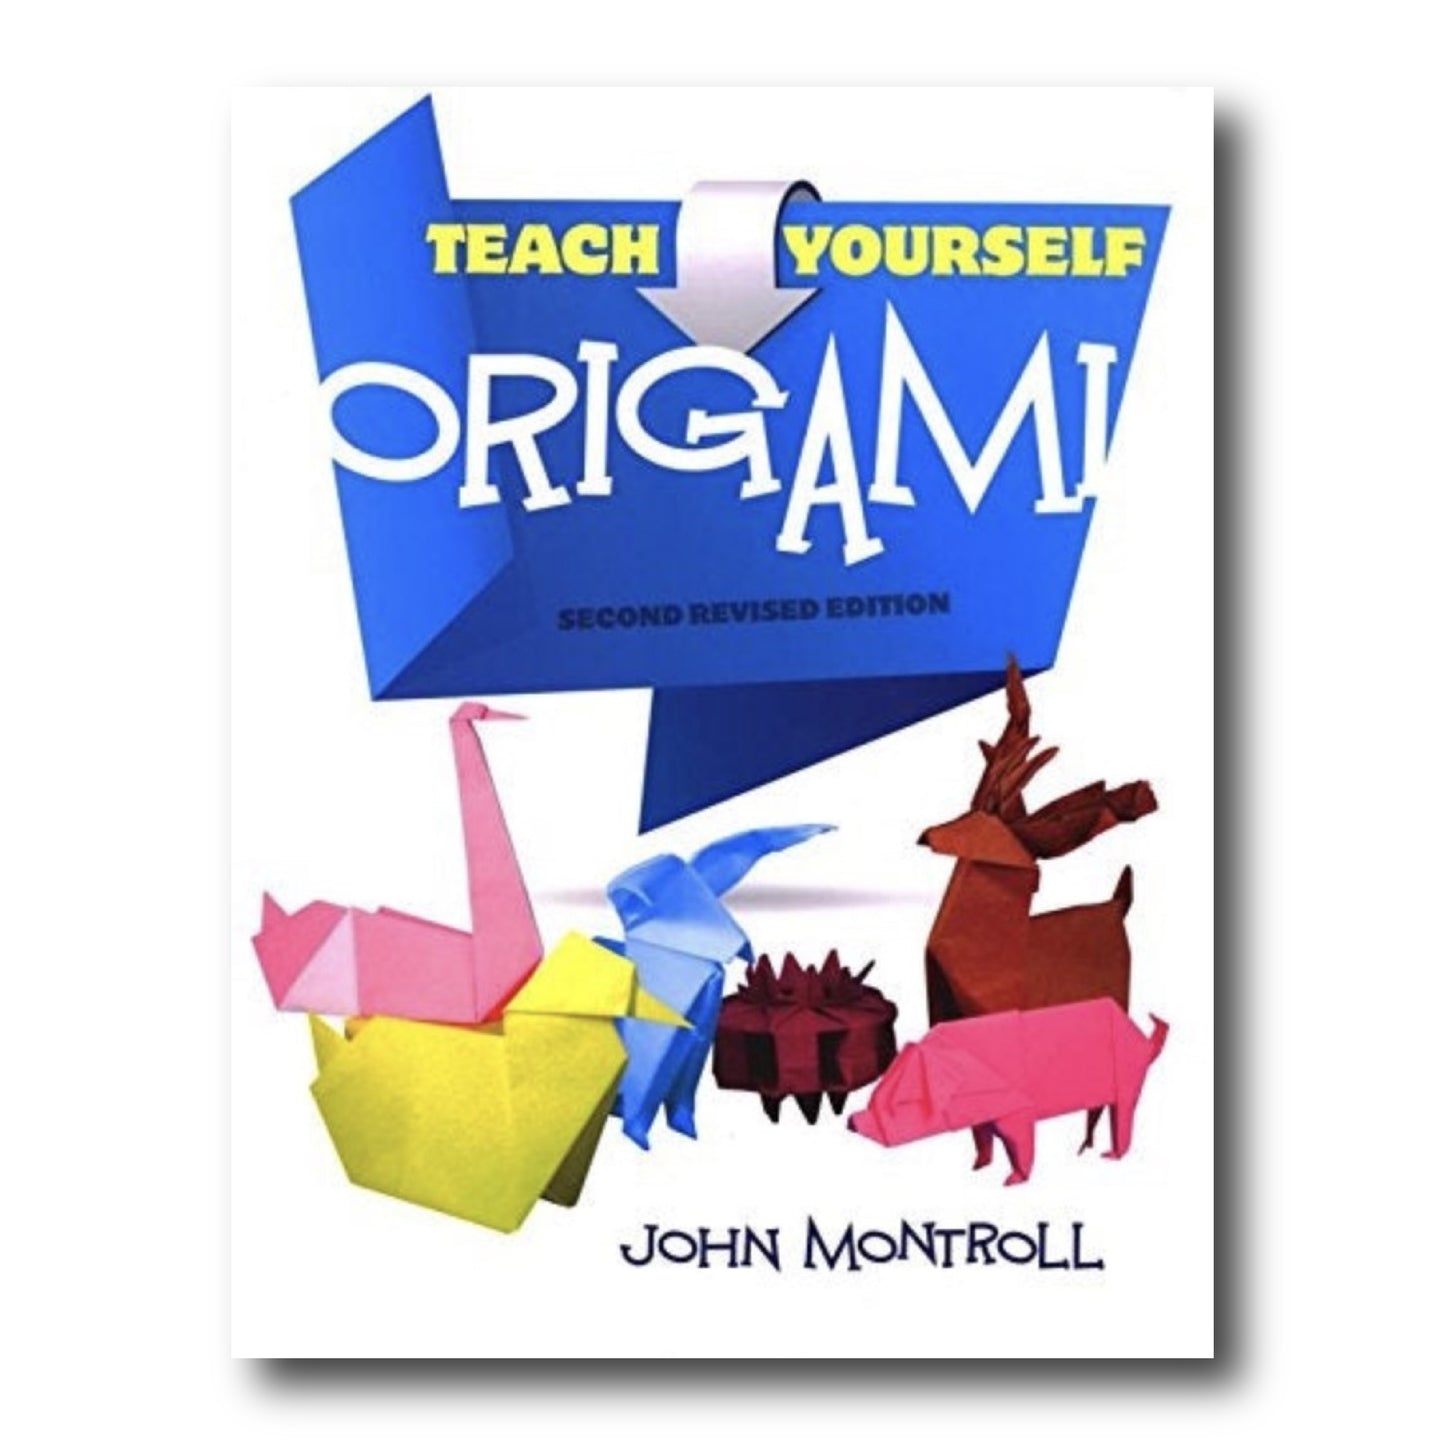 Teach Yourself Origami: Second Revised Edition